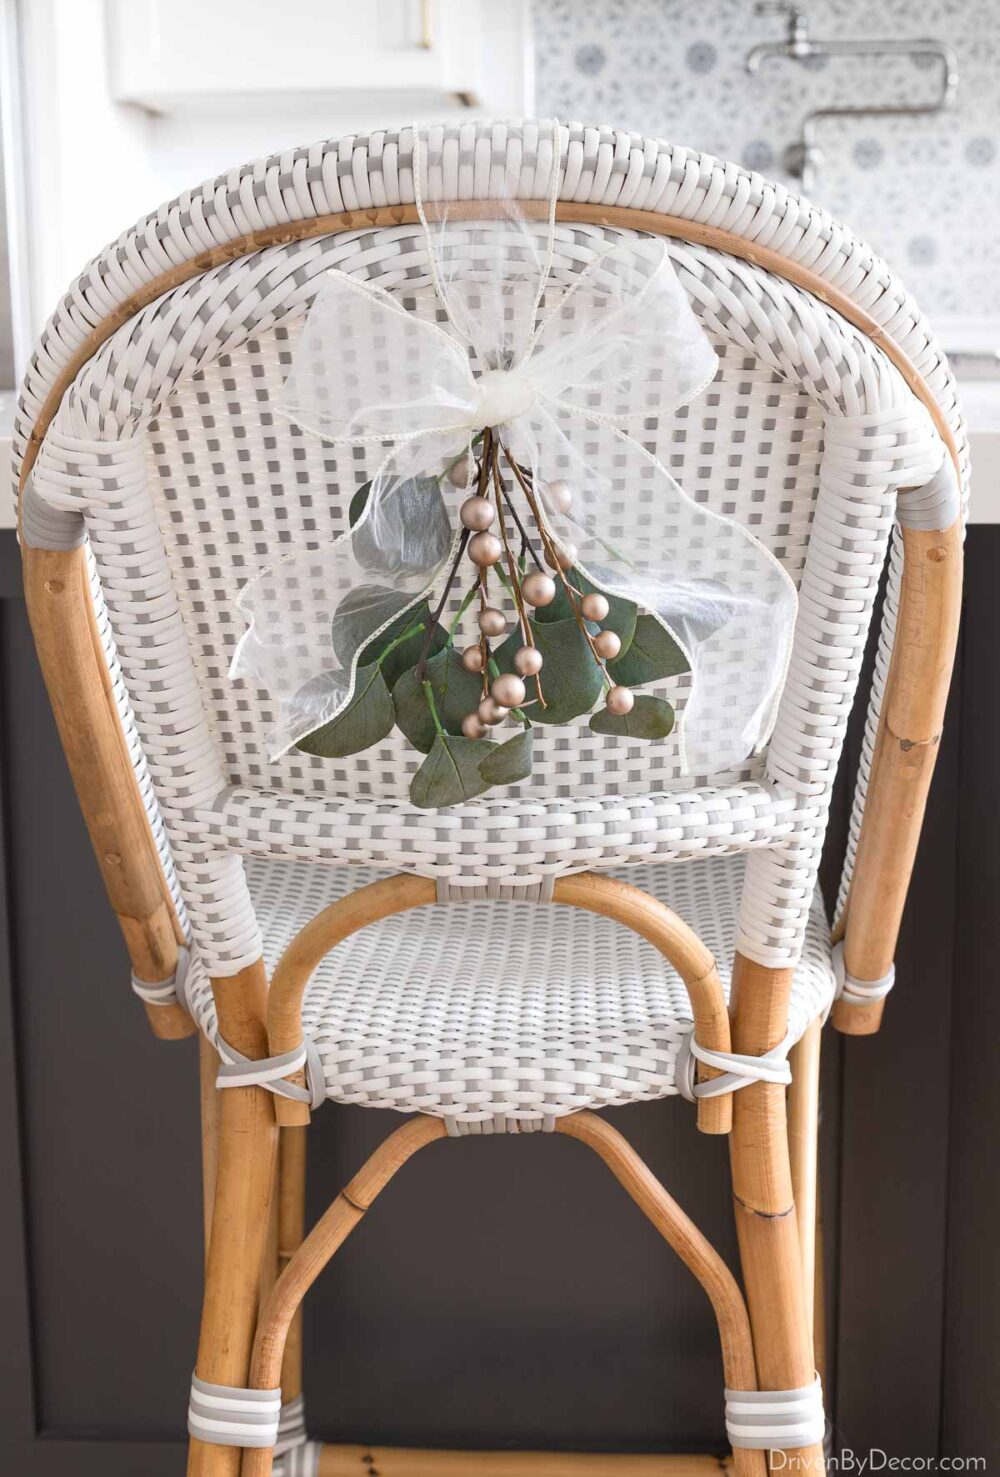 Adding a sprig of eucalyptus and gold berries to chair backs - love this simple Christmas decoration idea!